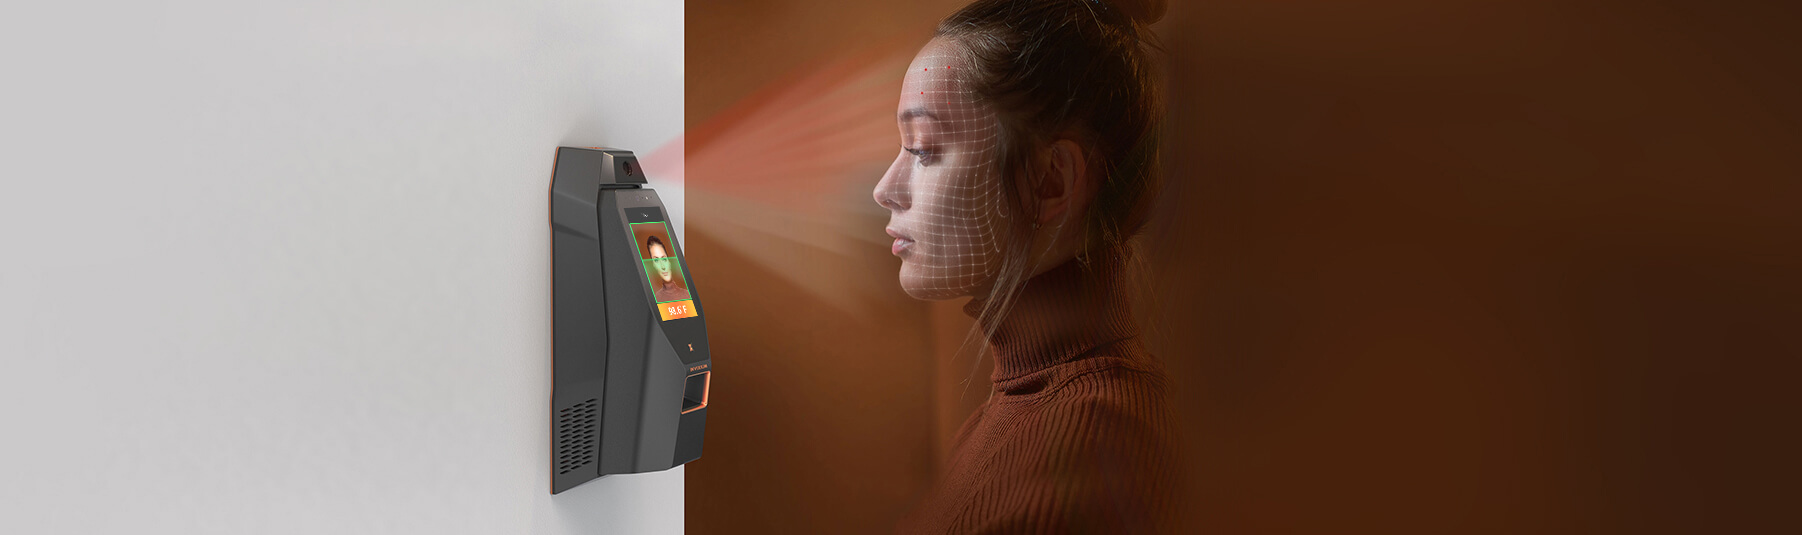 Thermal Face Recognition Solution